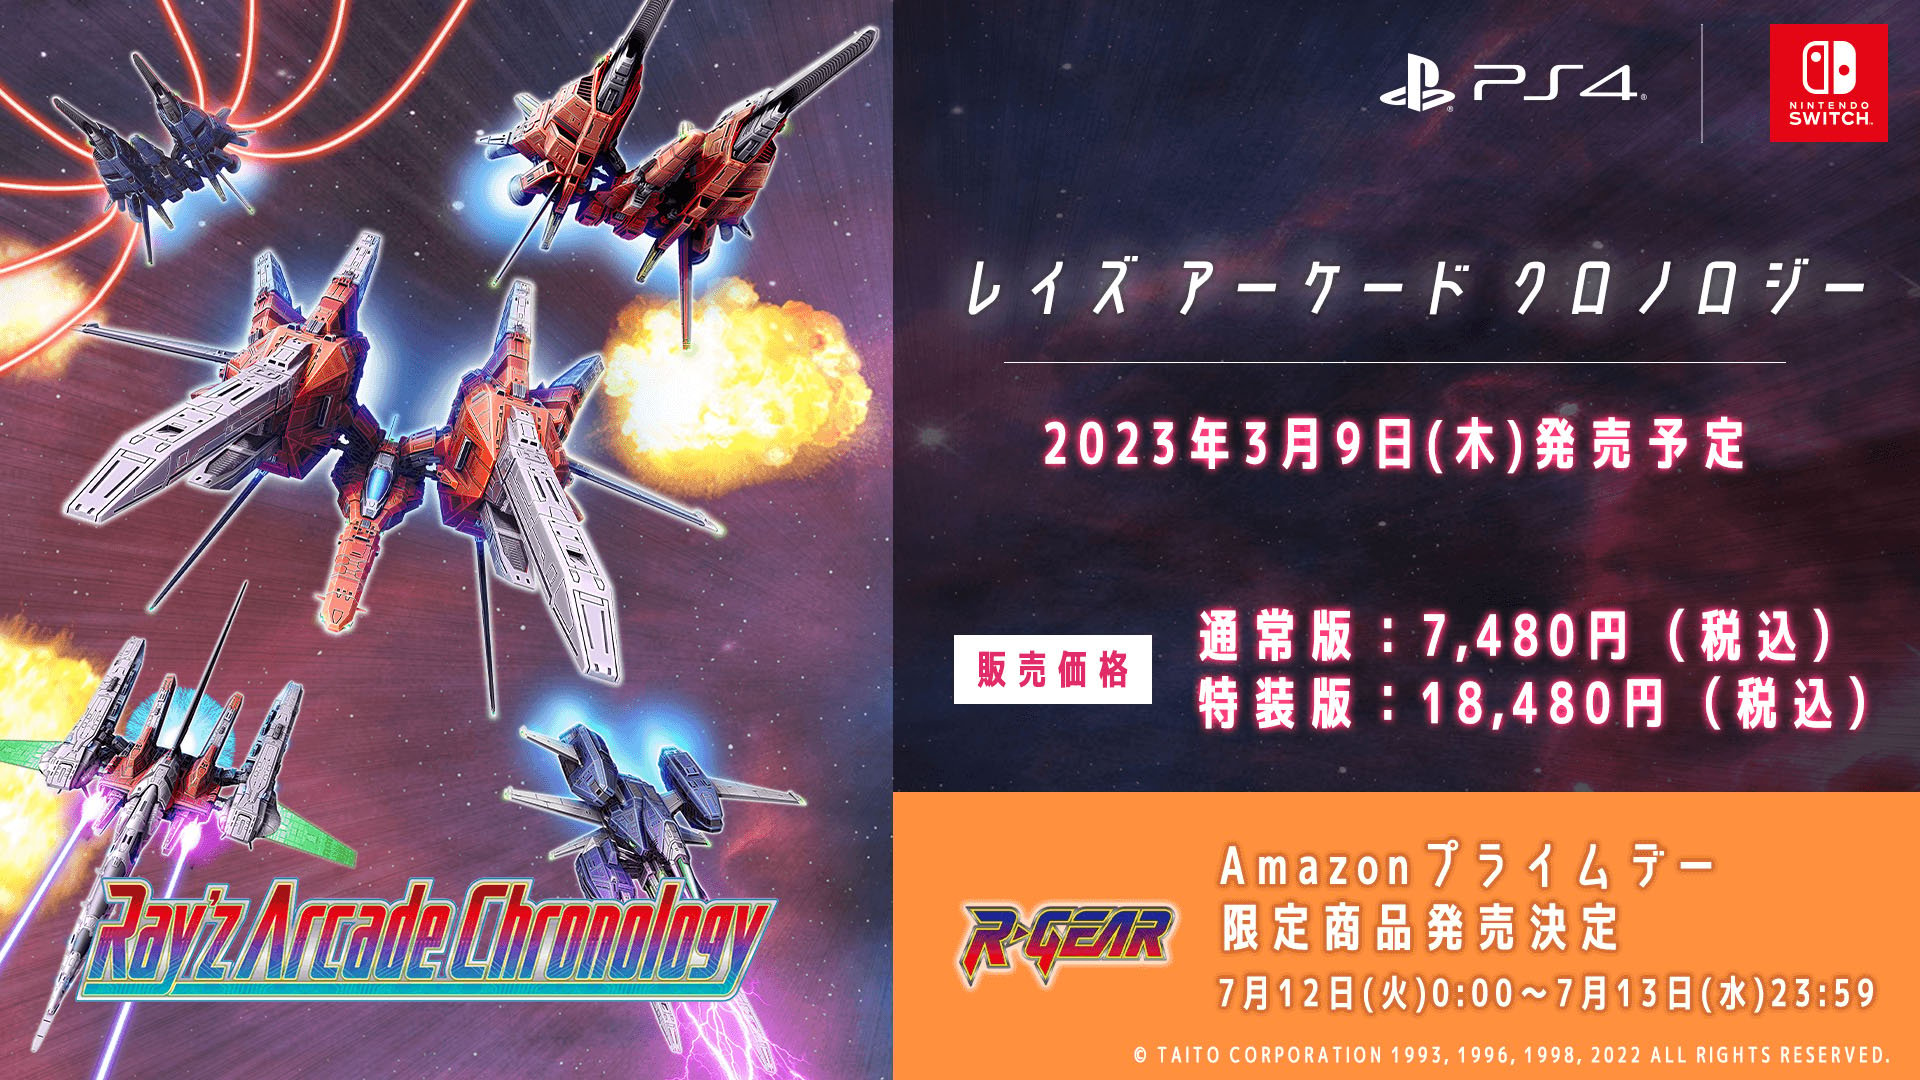 #
      Ray’z Arcade Chronology launches March 9, 2023 in Japan